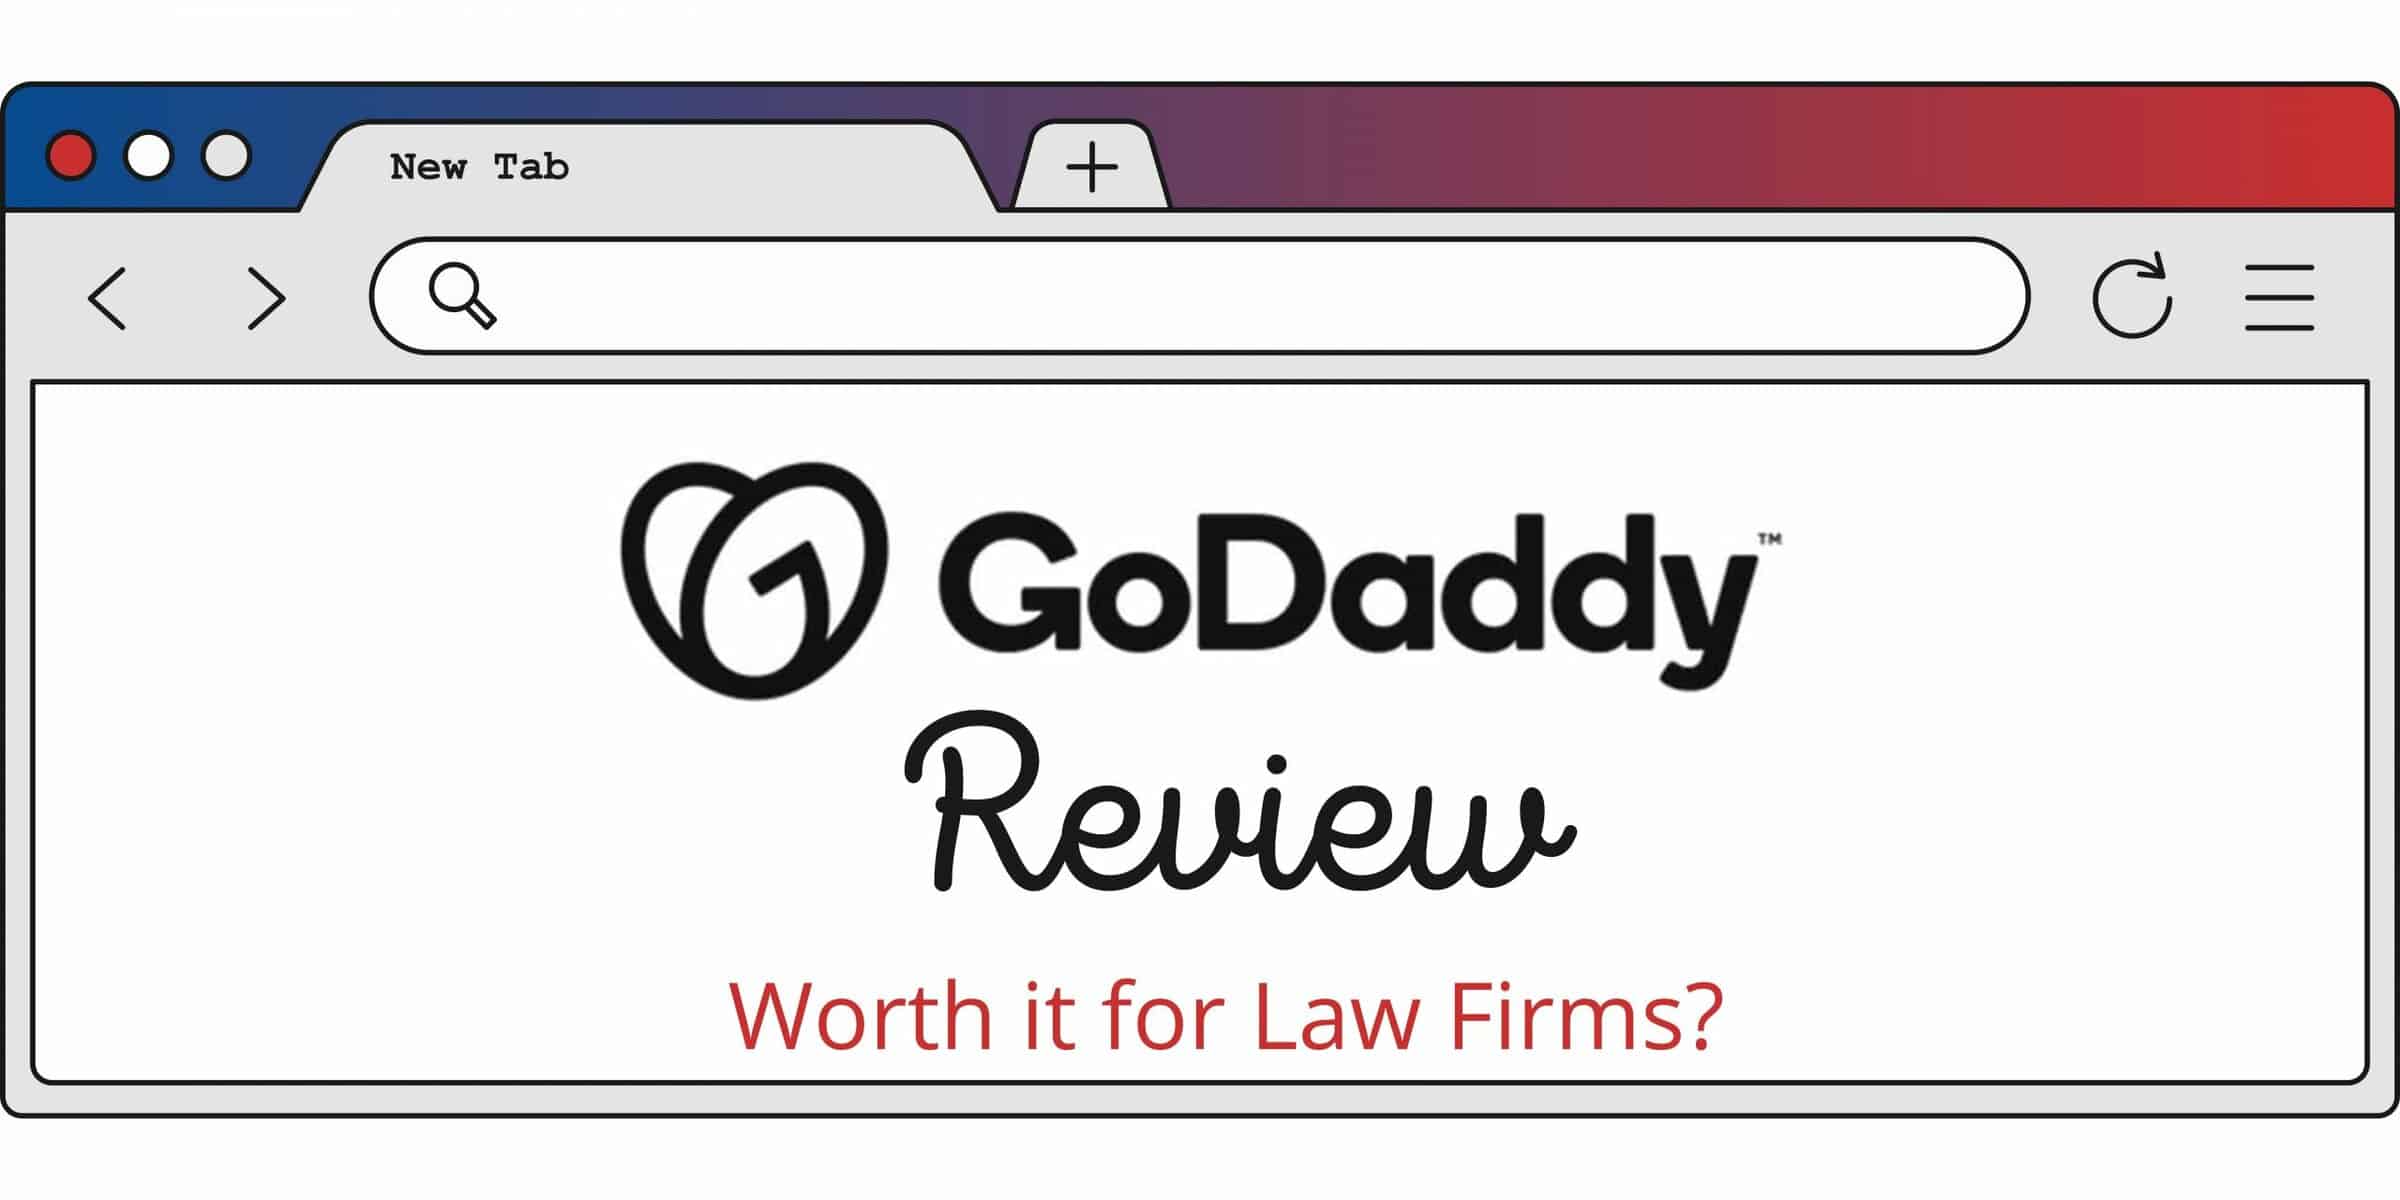 GoDaddy Review Websites for Law Firms